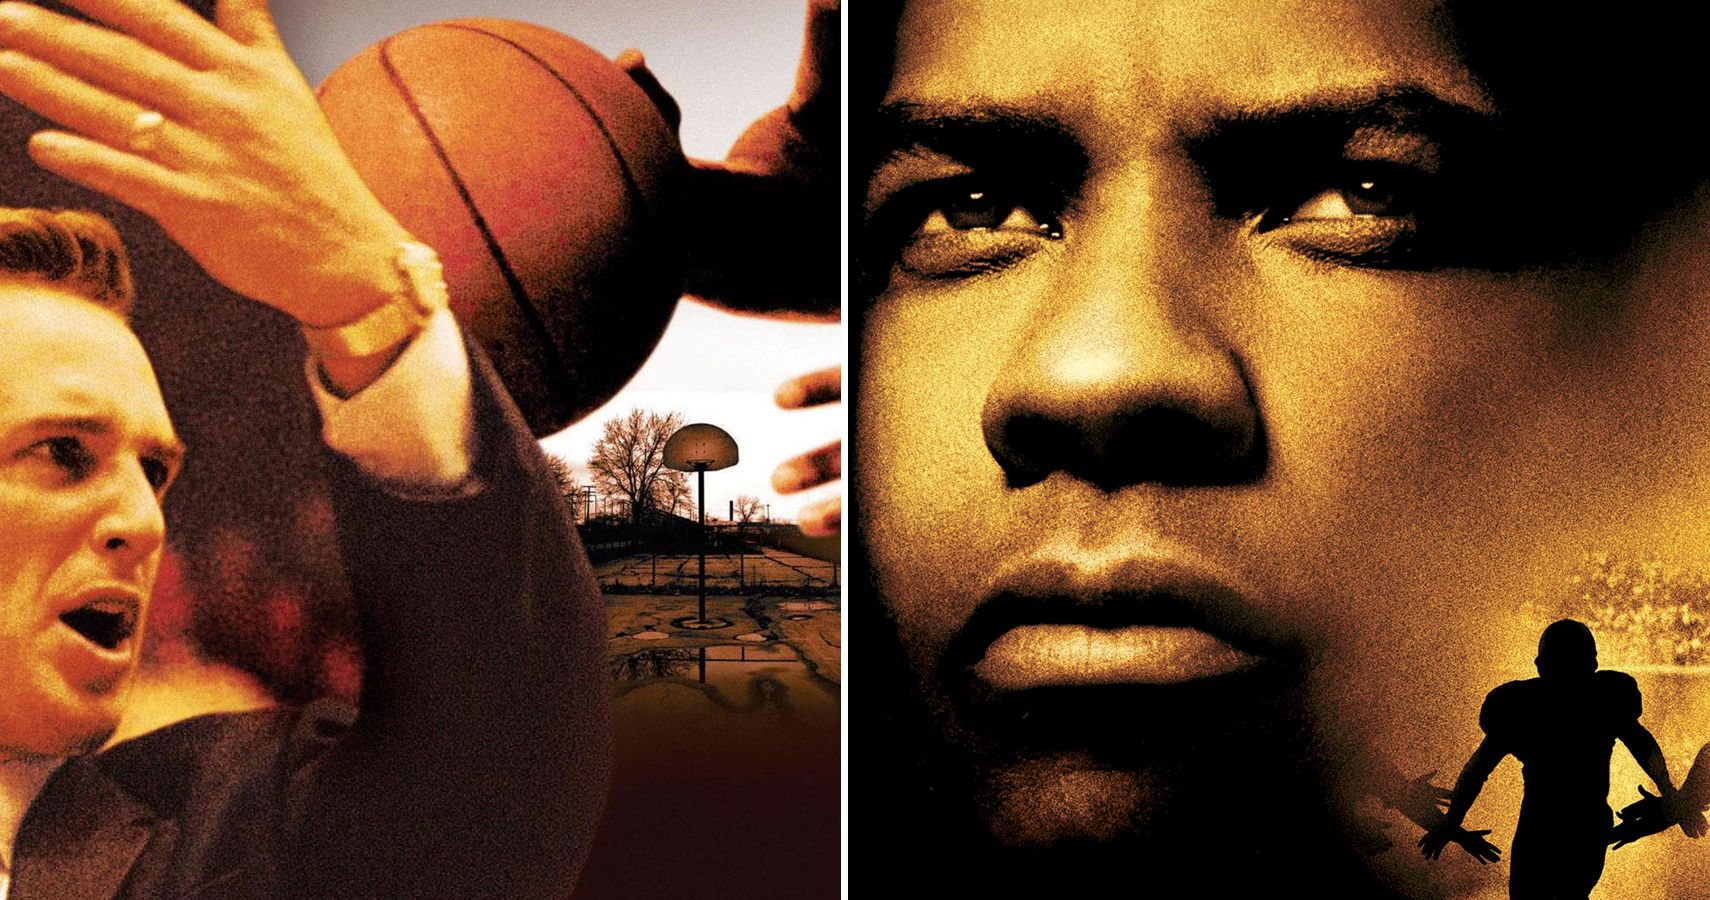 Like Mike: One of the most under-rated sporting movies of all time hits  Disney+